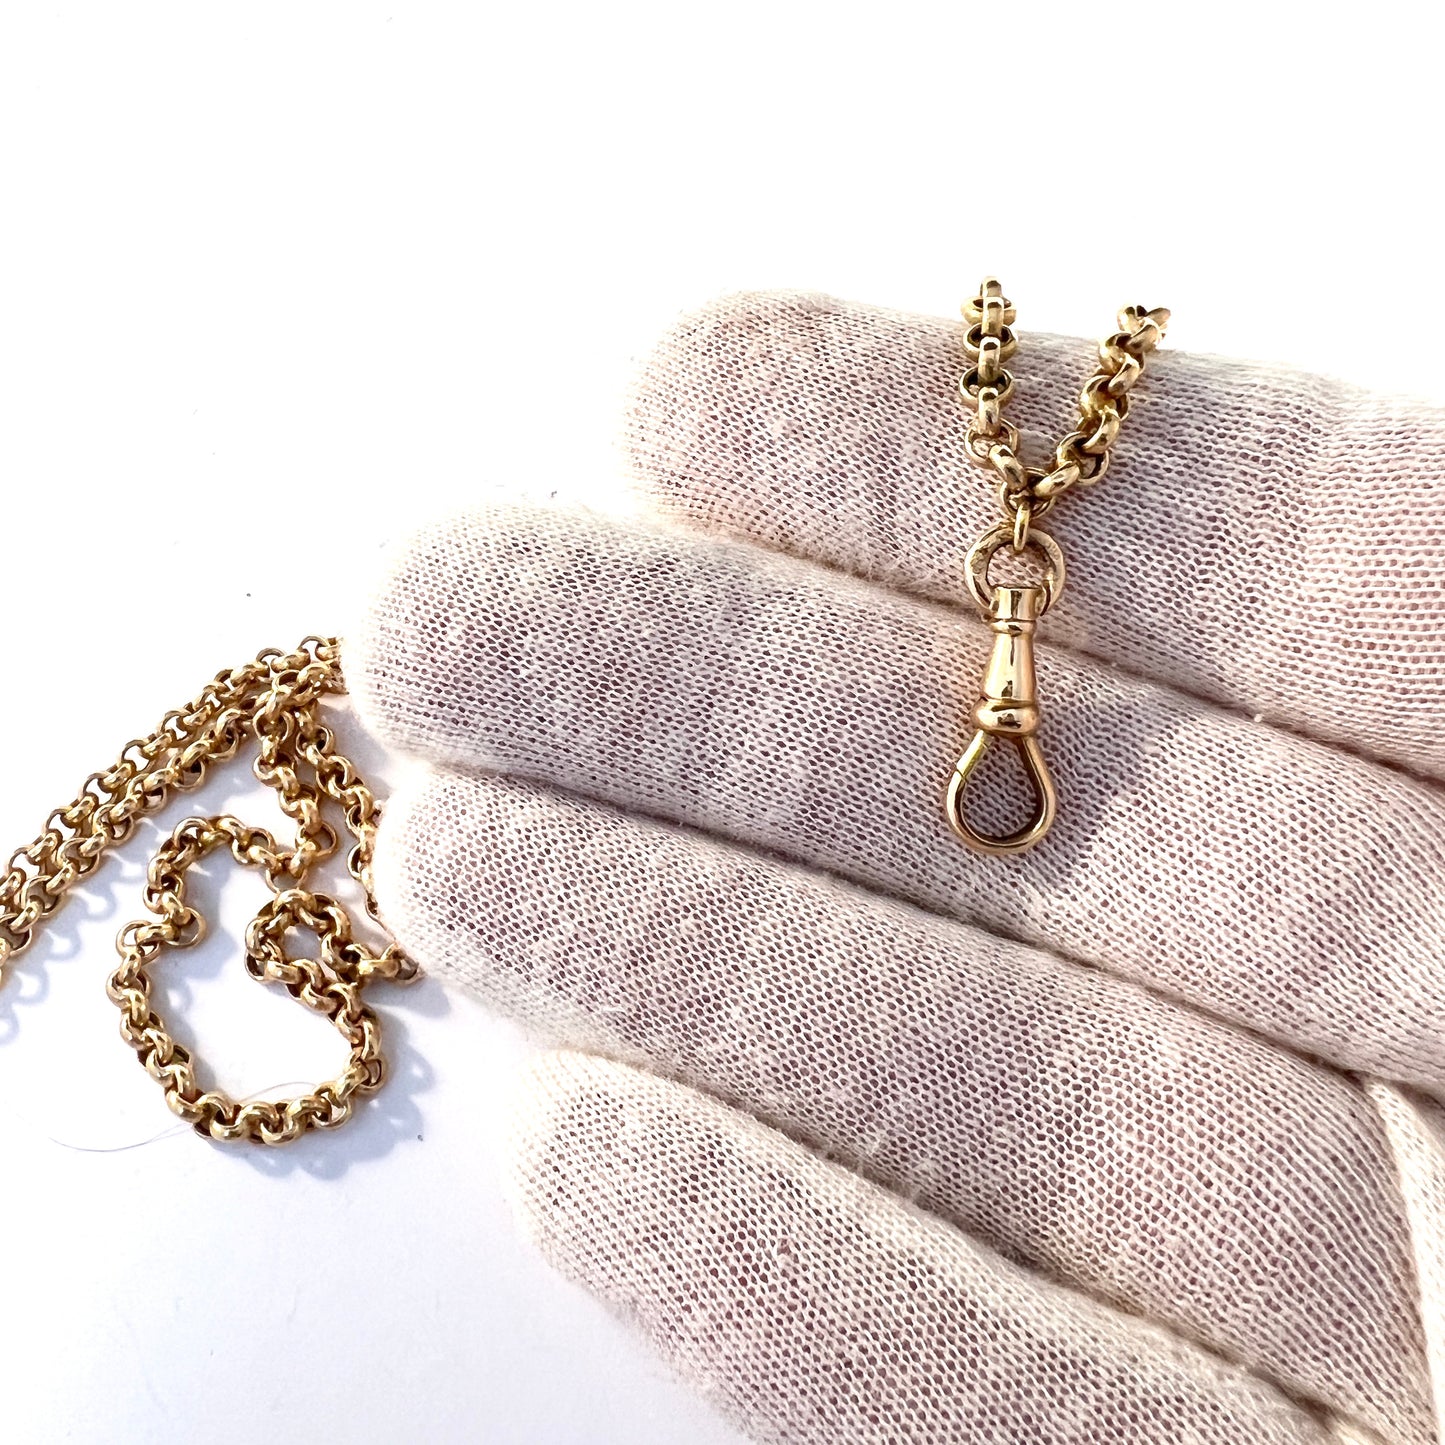 Sweden Early 1900s 18k Gold Watch Chain in Perfect Necklace Length. 27in  15.5gram